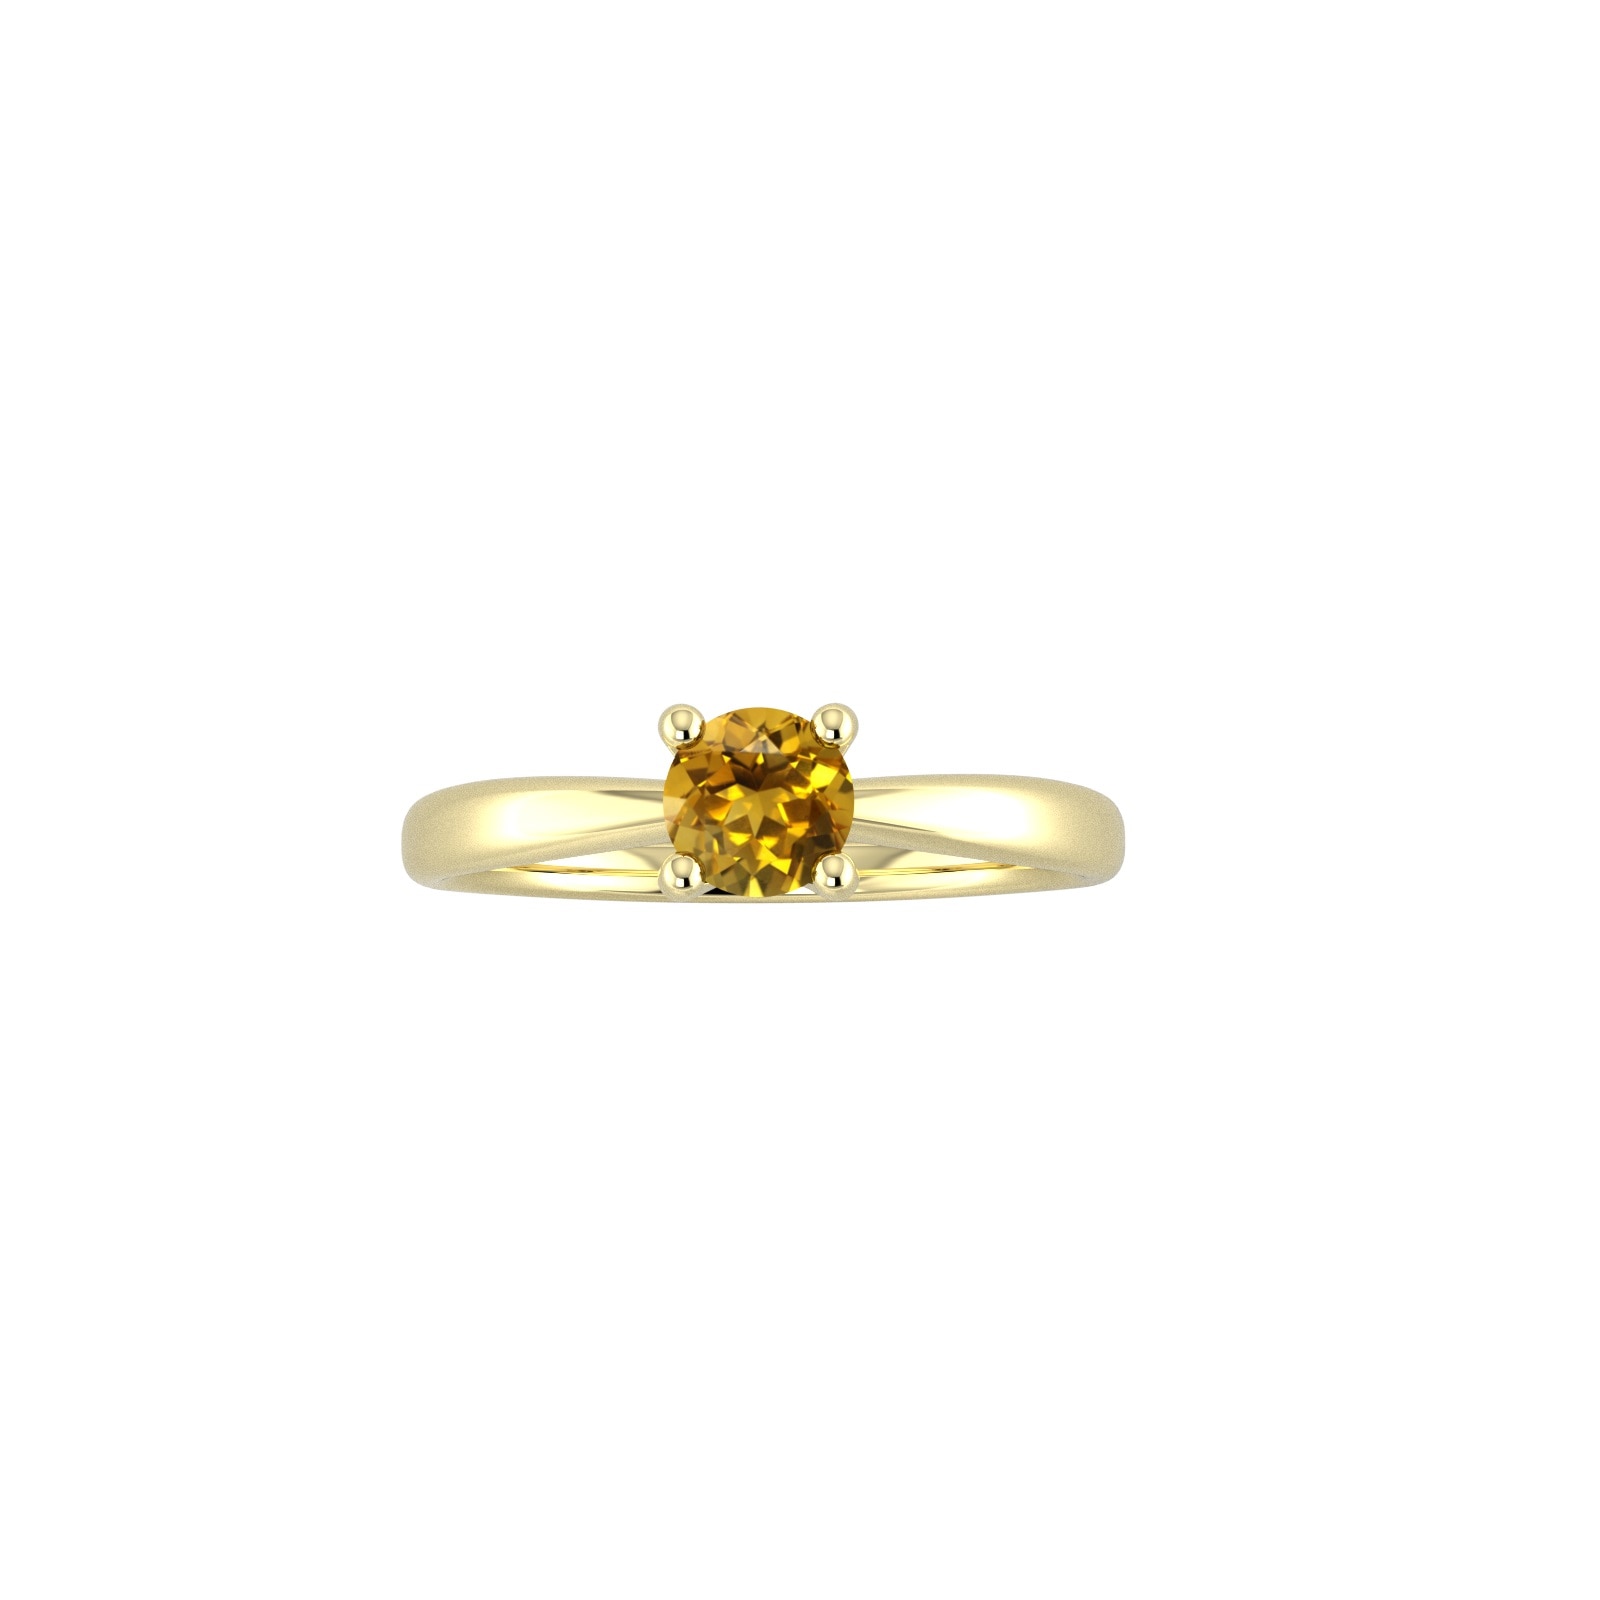 9ct Yellow Gold 4 Claw Citrine Ring